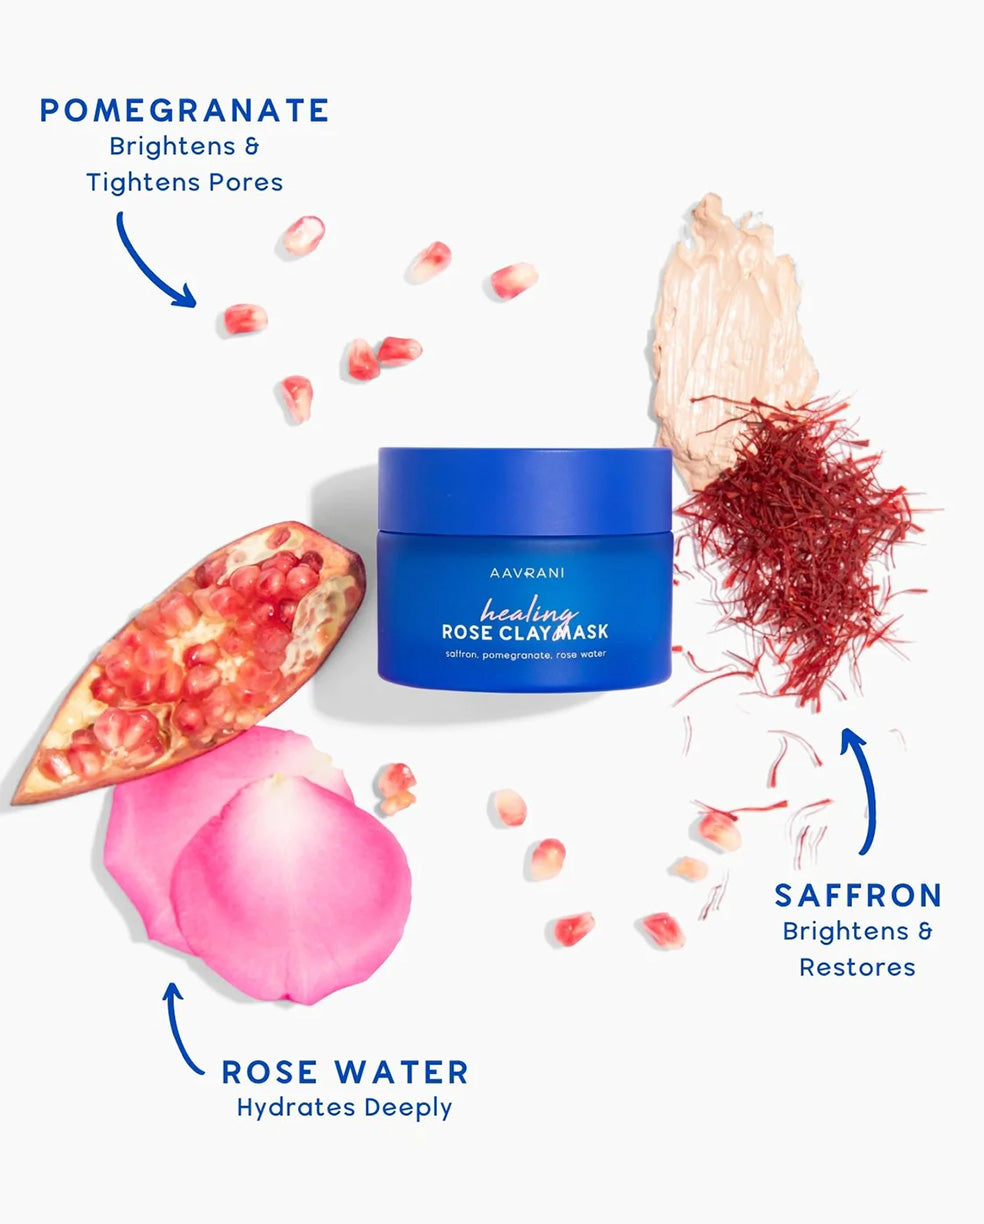 AAVRANI Healing Rose Clay Mask ingredients infographic